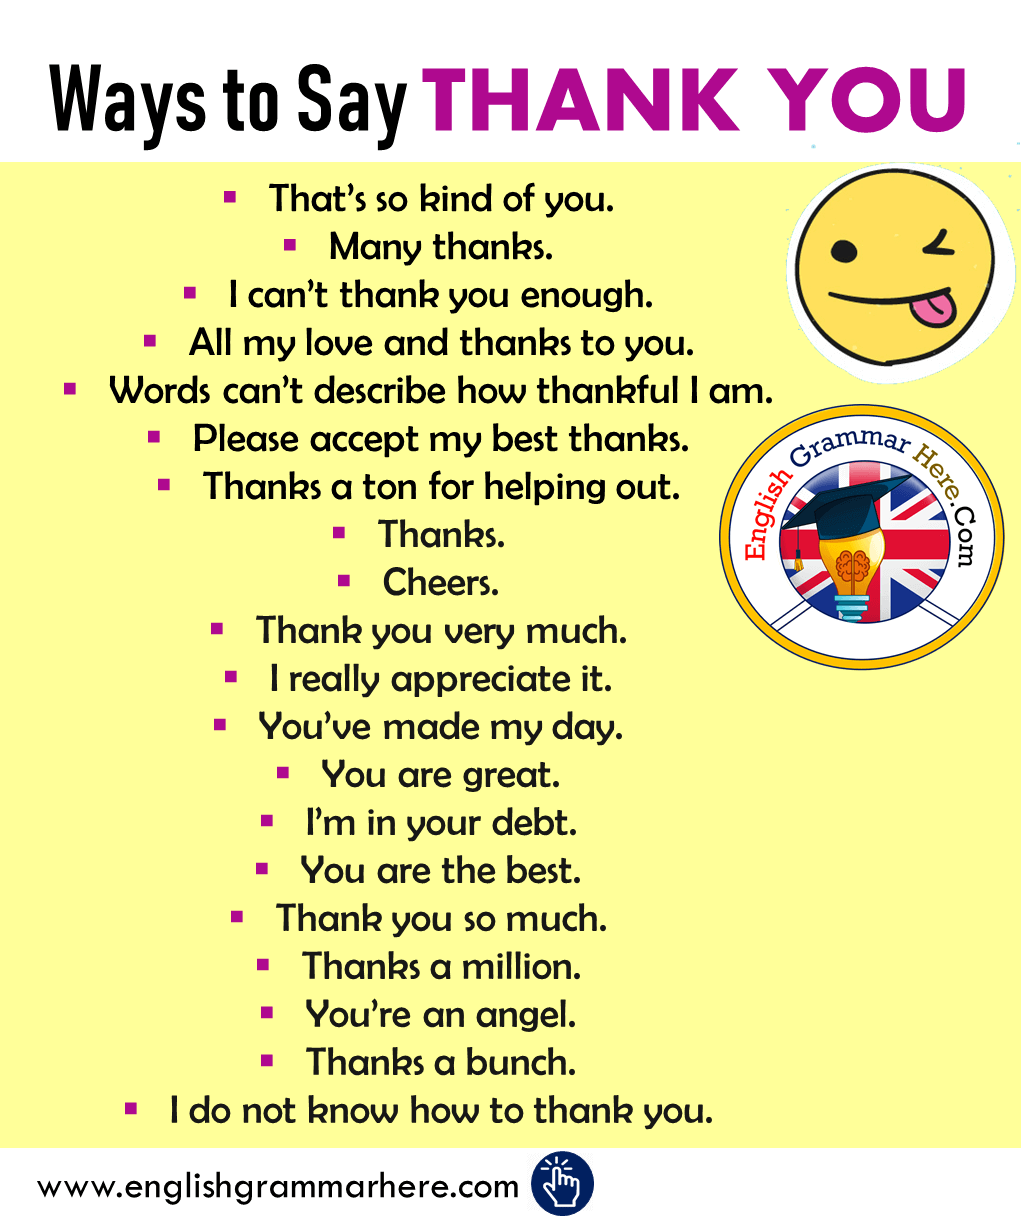 Different Ways to Say THANK YOU in English